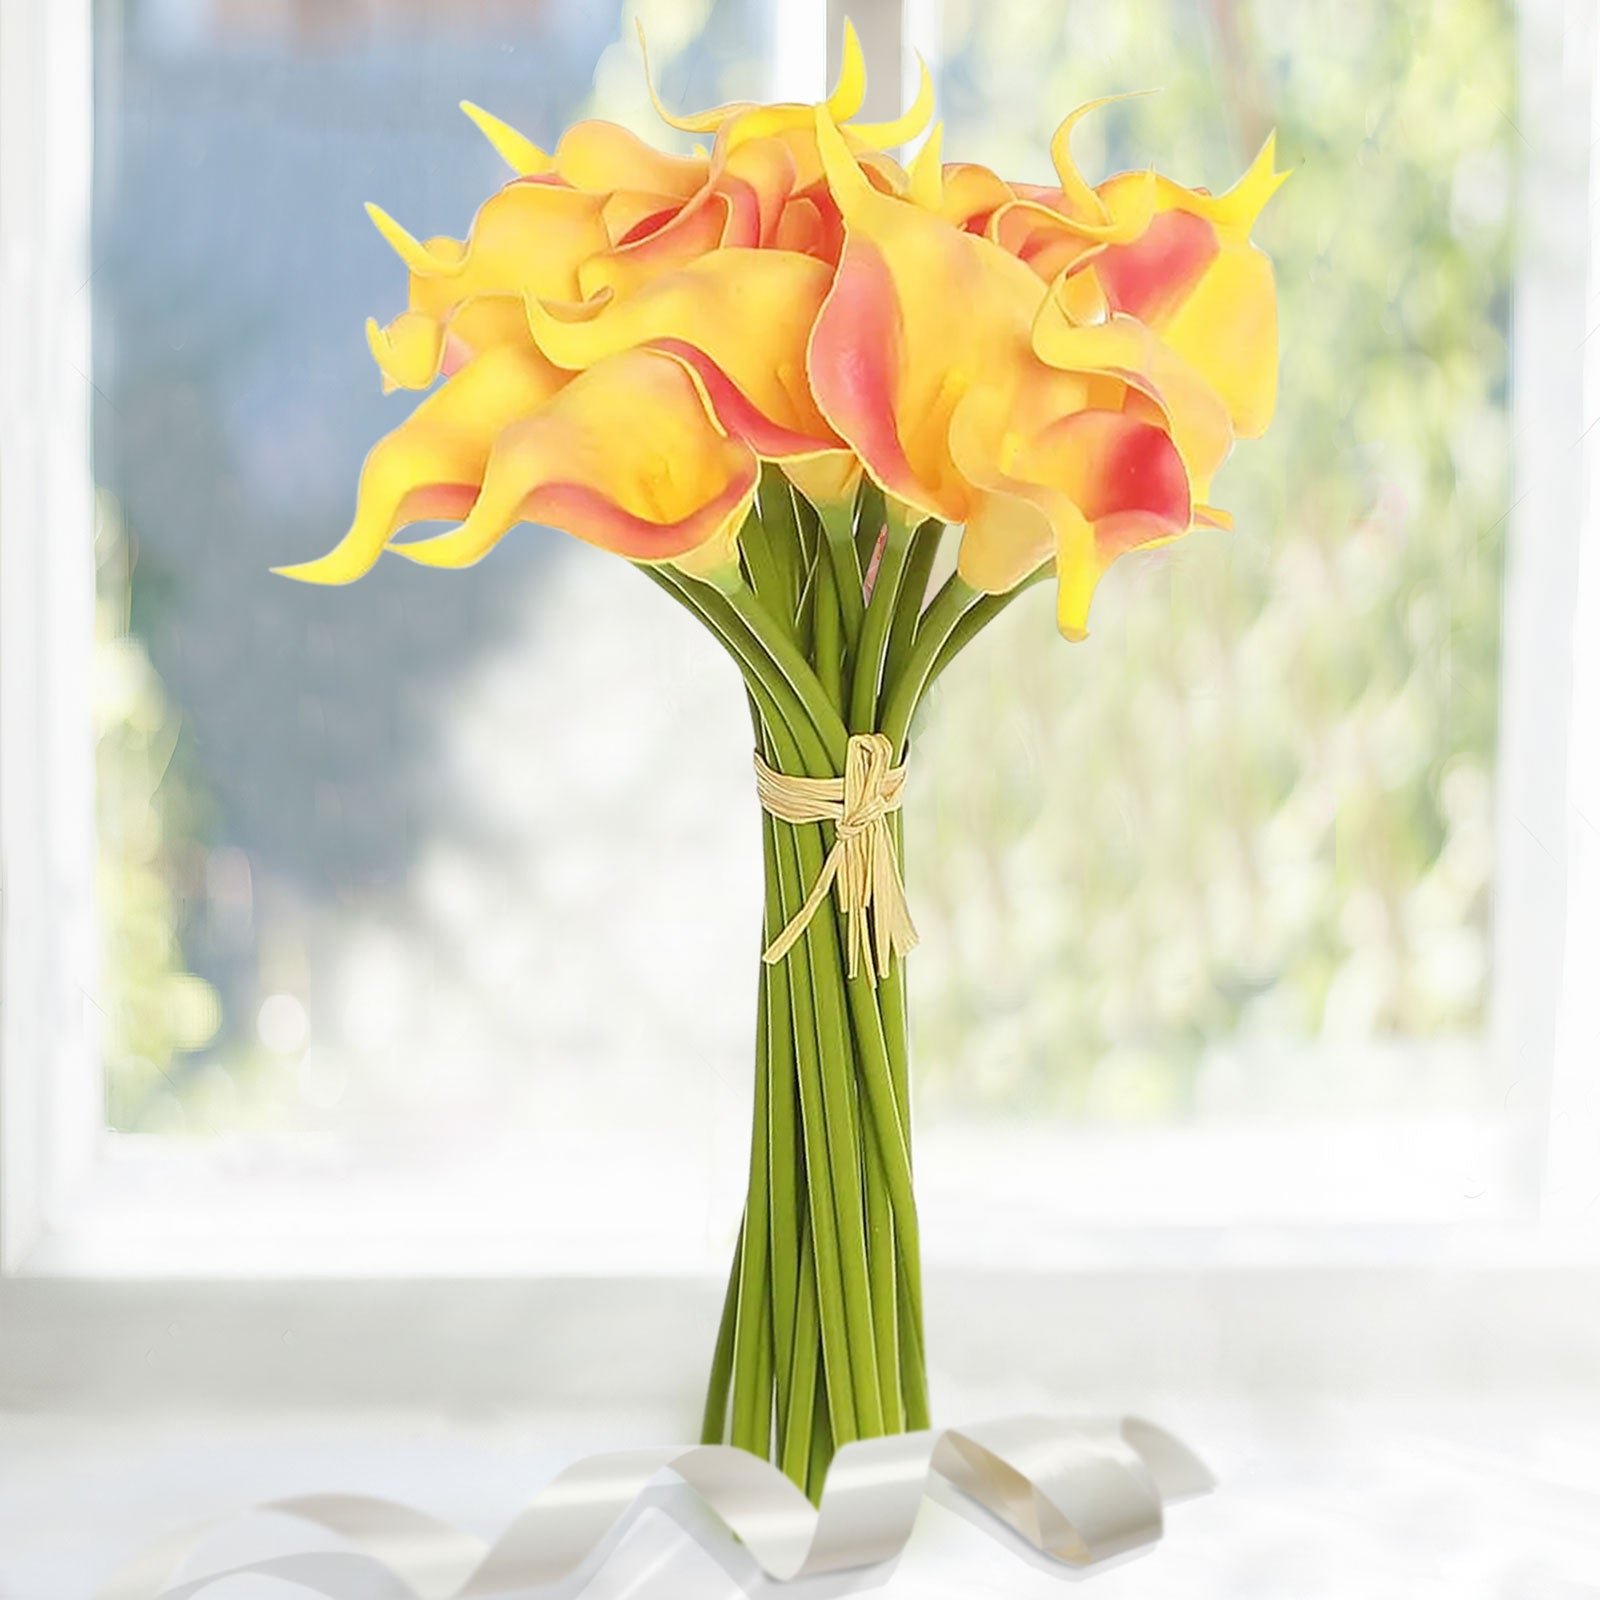 Efavormart 20 Pack 14" Tall Artificial Calla Lily Flowers Real Touch Single Stem Calla Lilies -  Orange/Yellow - image 1 of 11